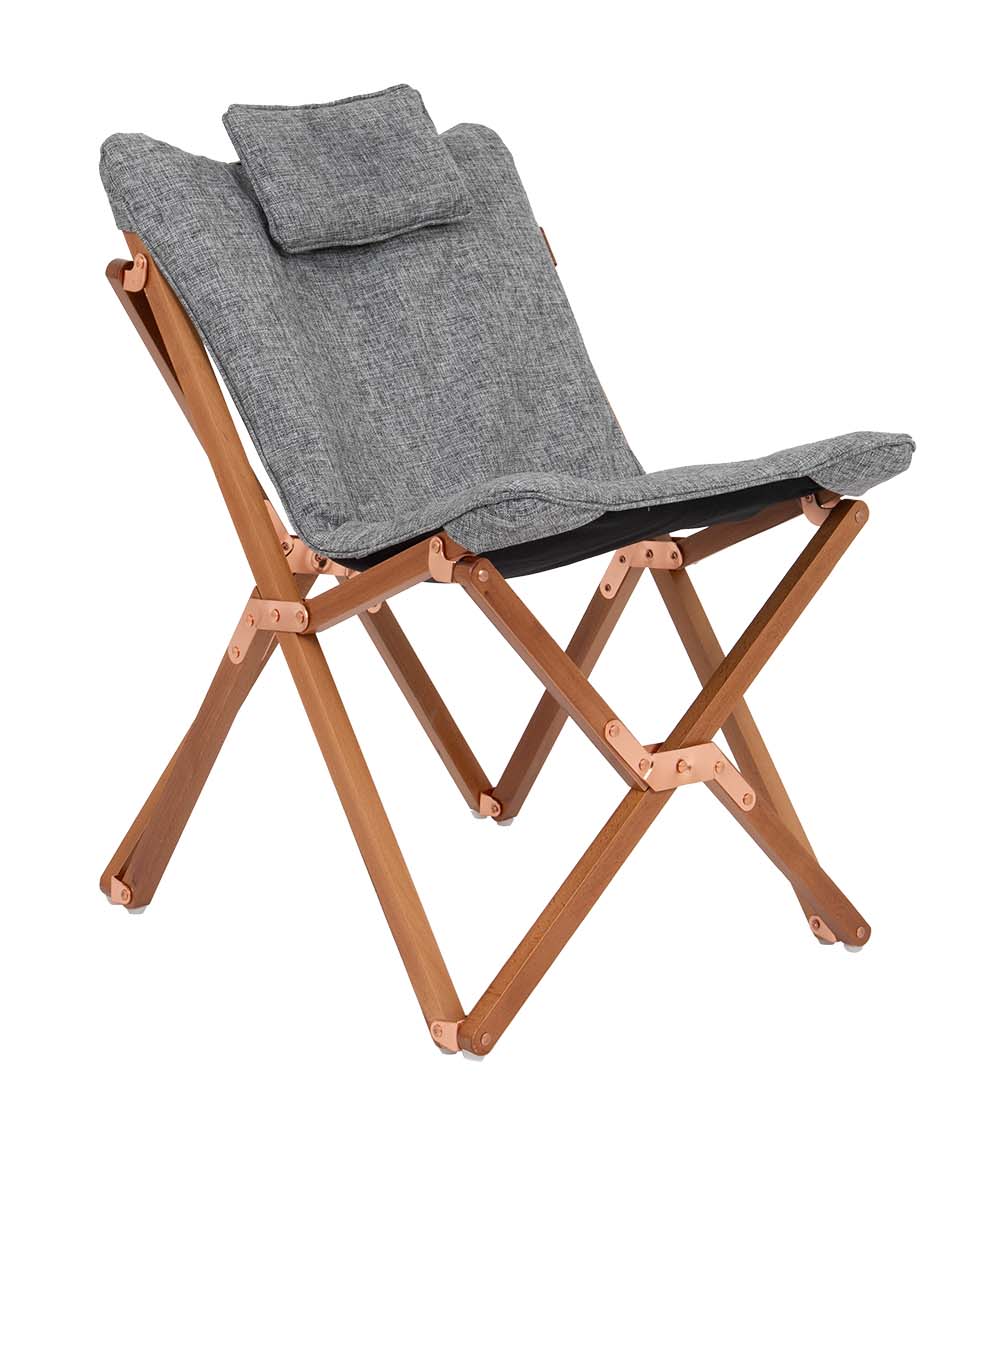 1200368 Bo-Camp - Urban Outdoor collection - Relaxstoel - Bloomsbury - S - Oxford polyester - Grijs